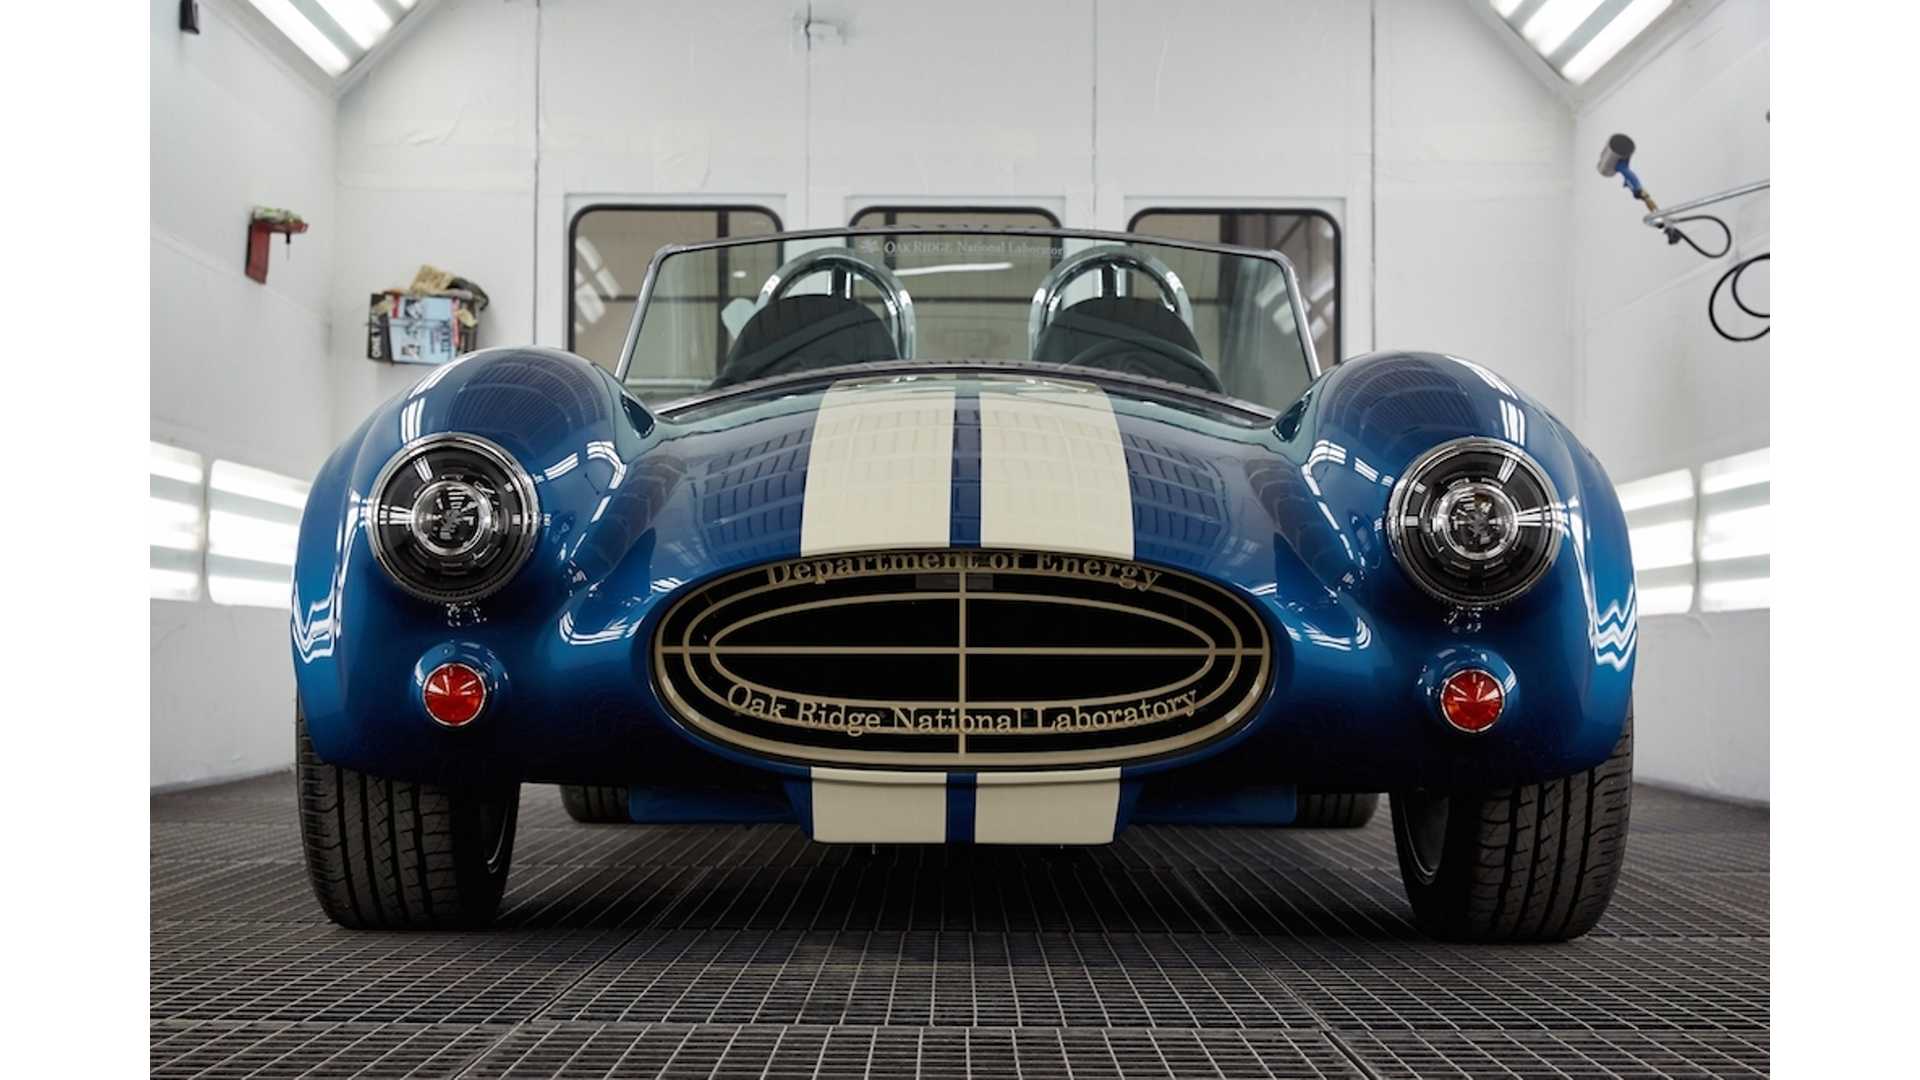 Wallpaper Wednesday: Electric Shelby Cobra